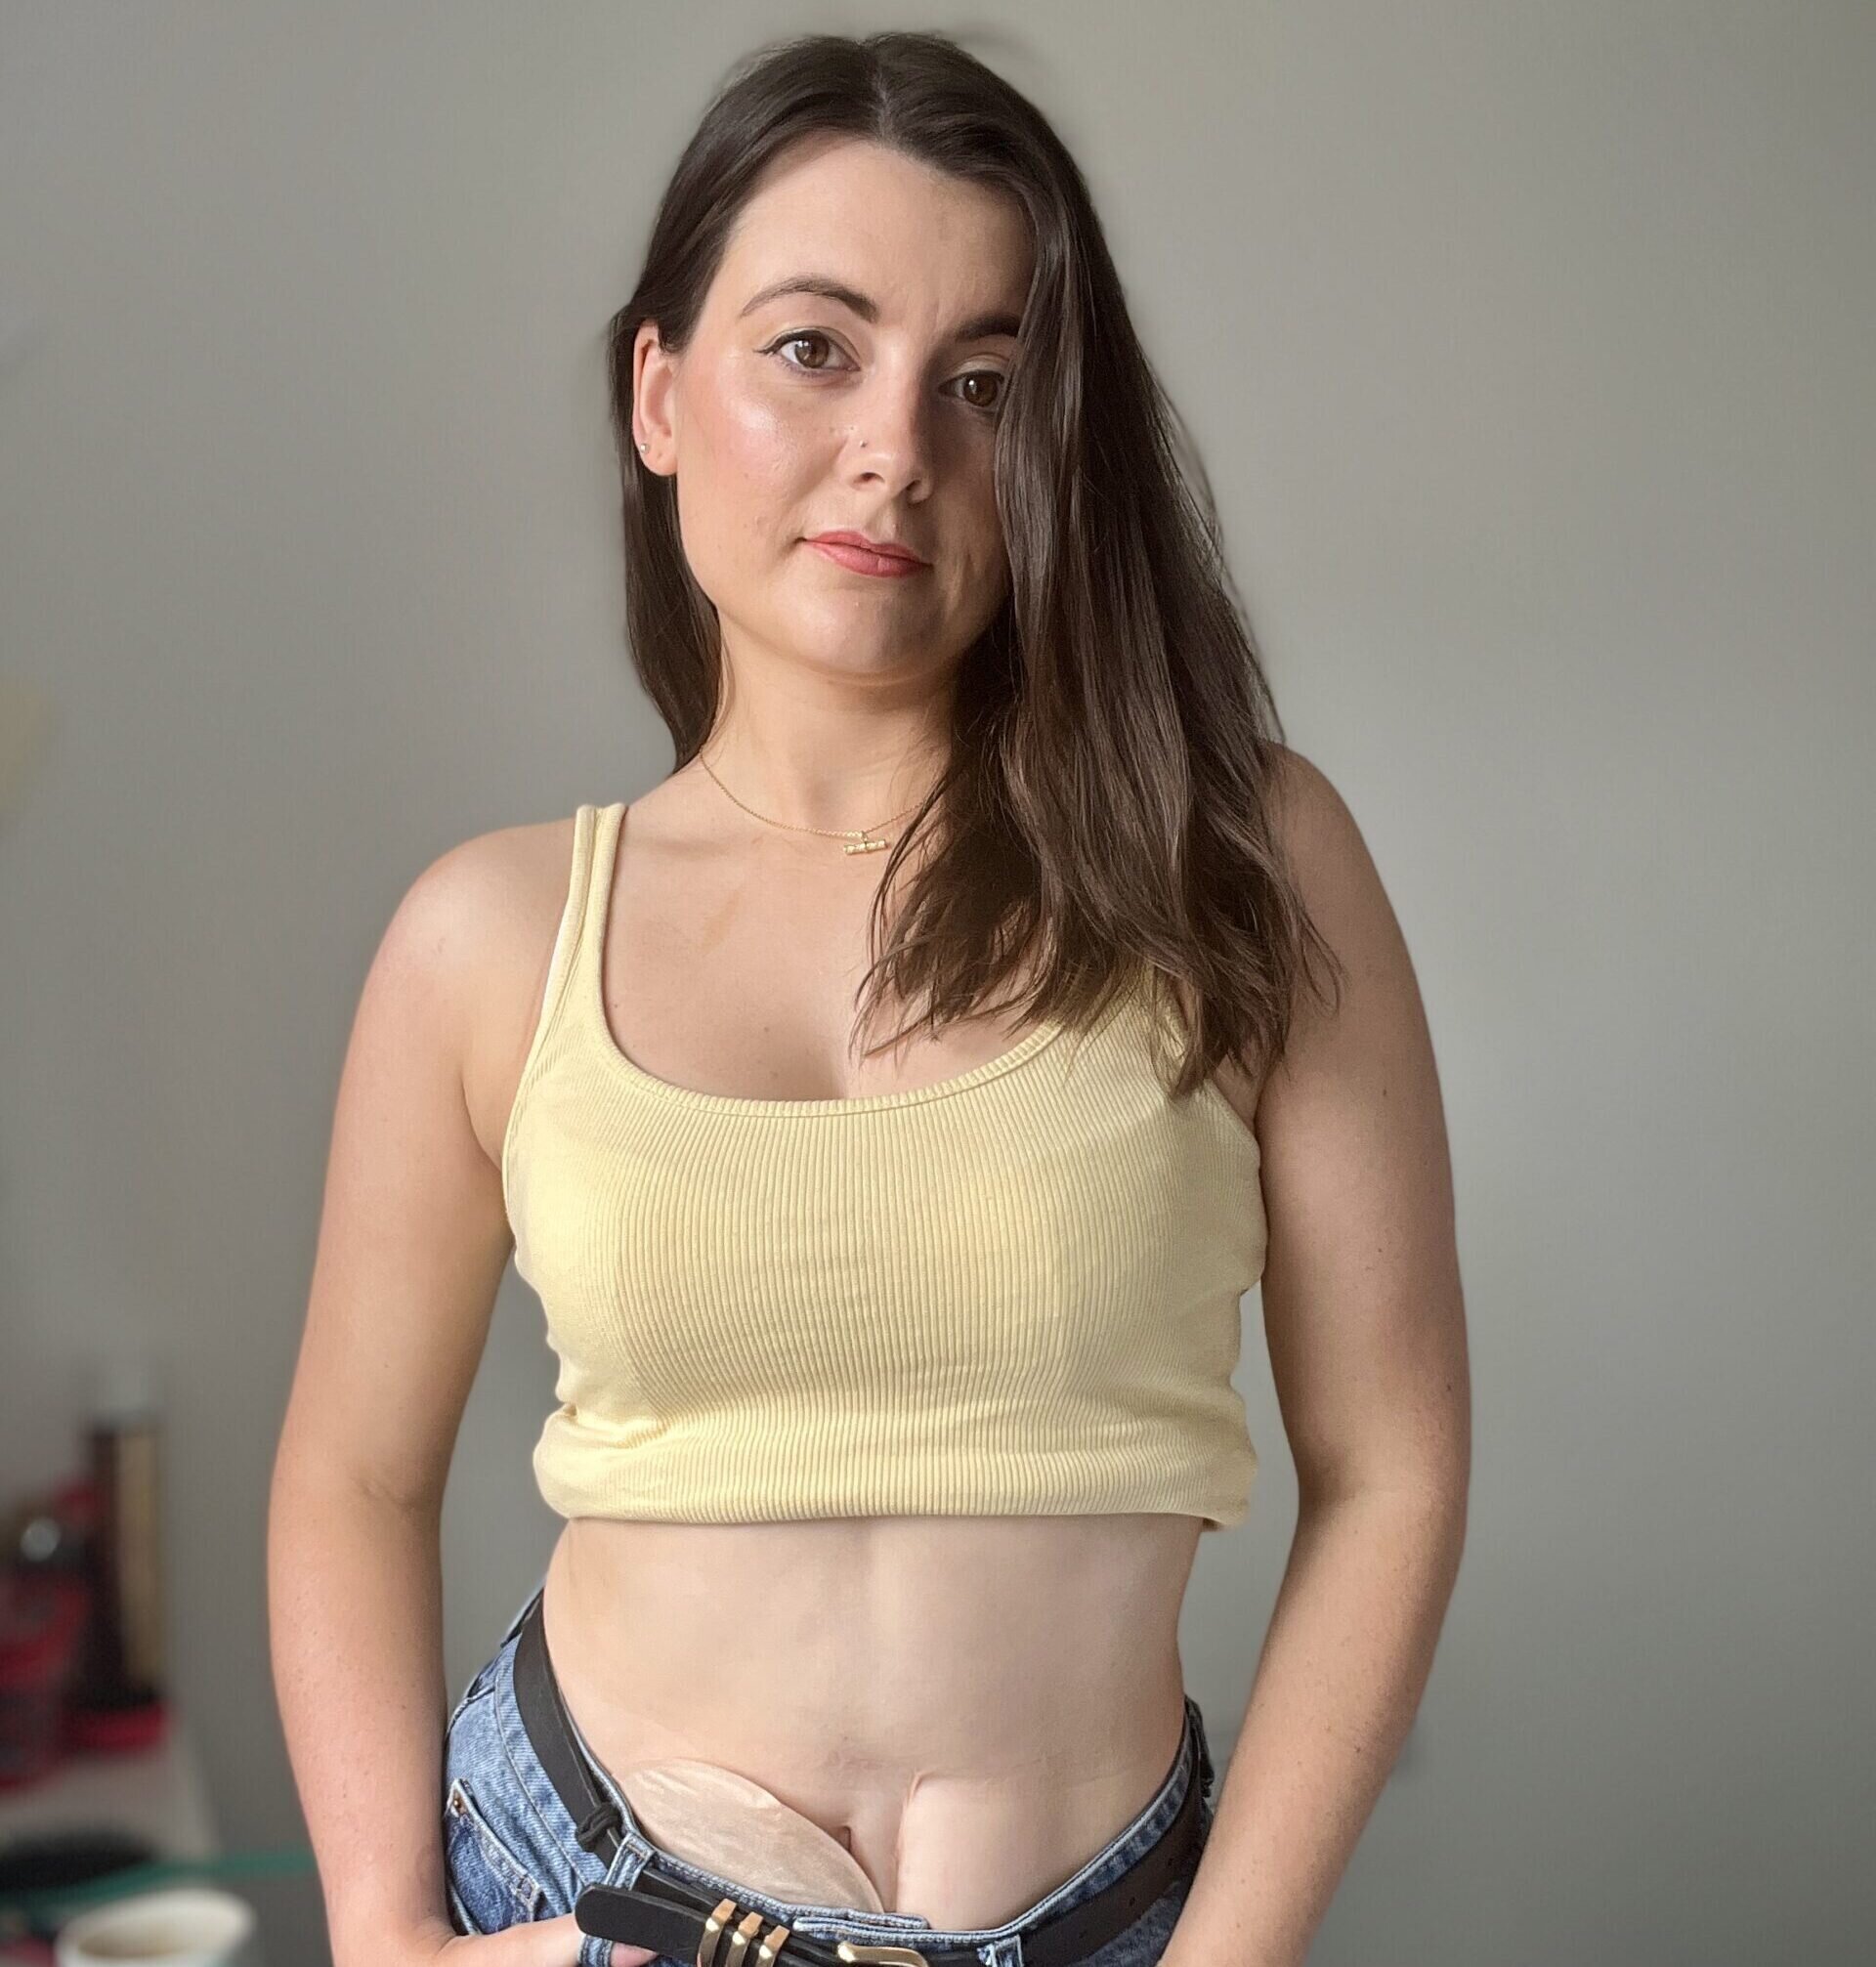 Amy poses in front of the camera wearing a yellow top, blue jeans and has her stoma bag on show.